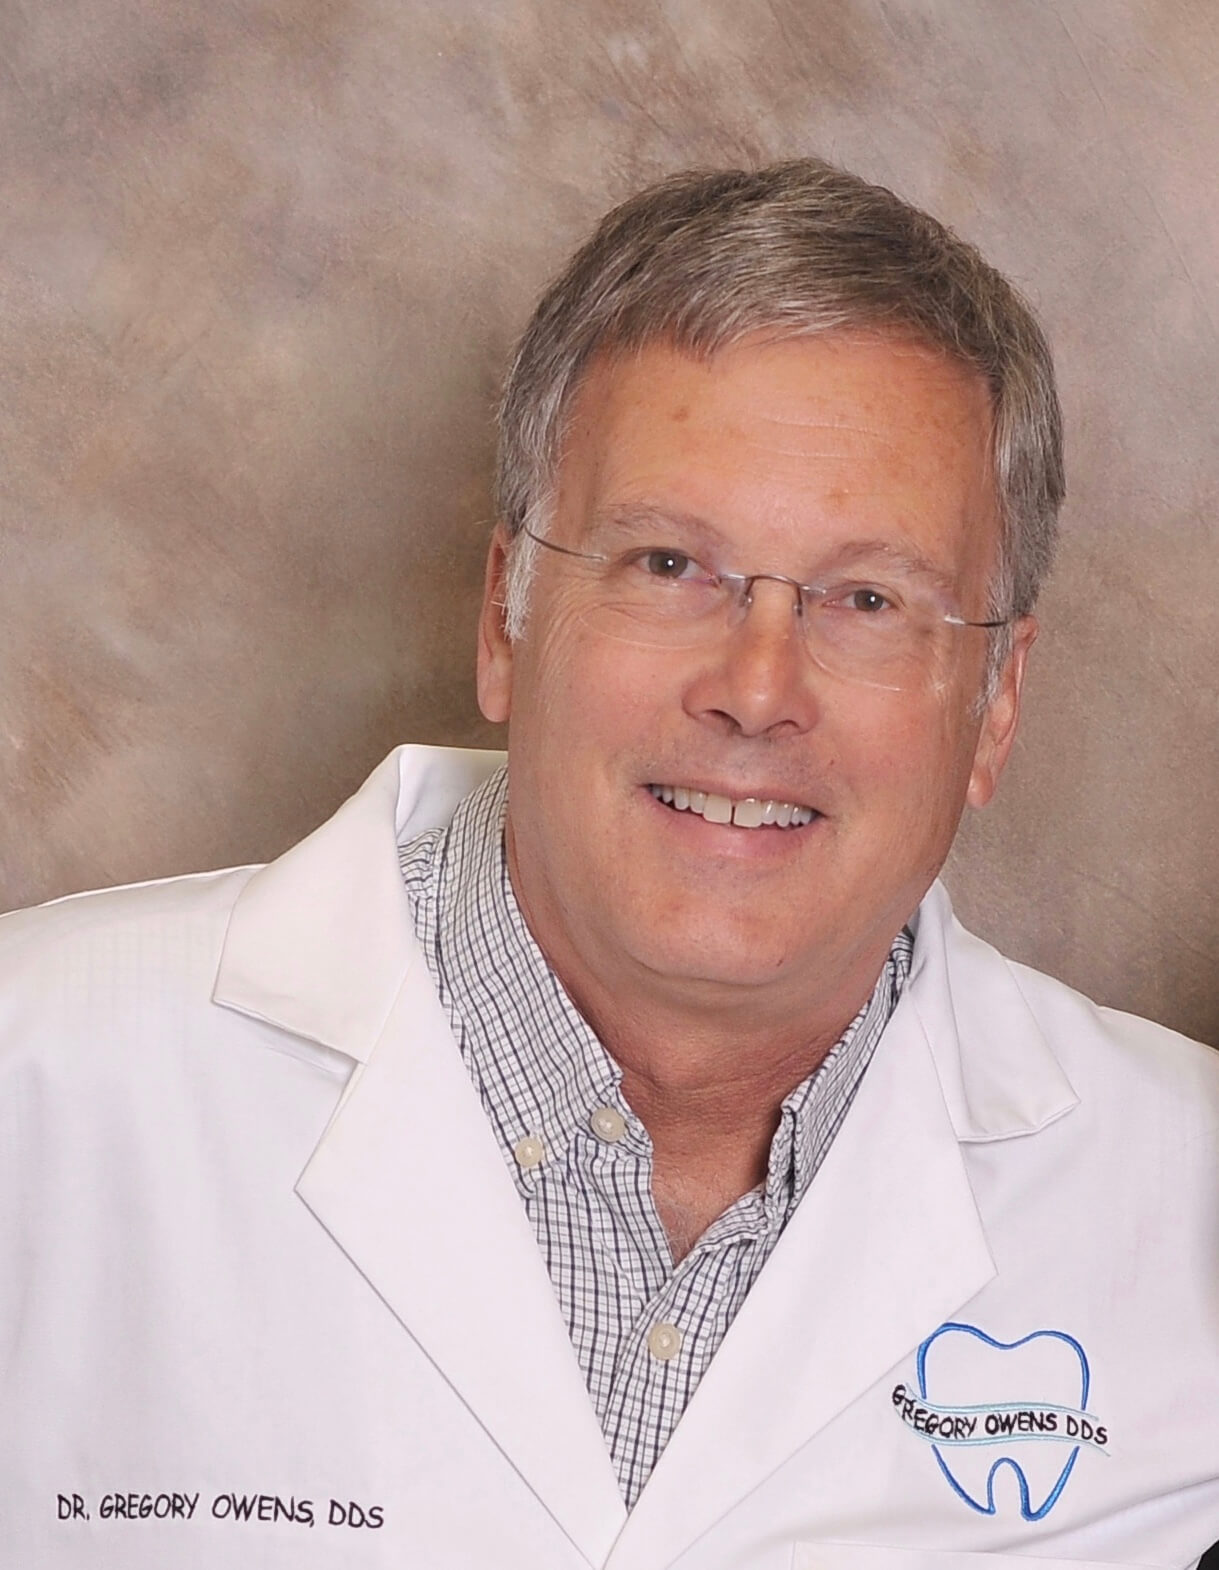 Dr. Gregory Owens, DDS